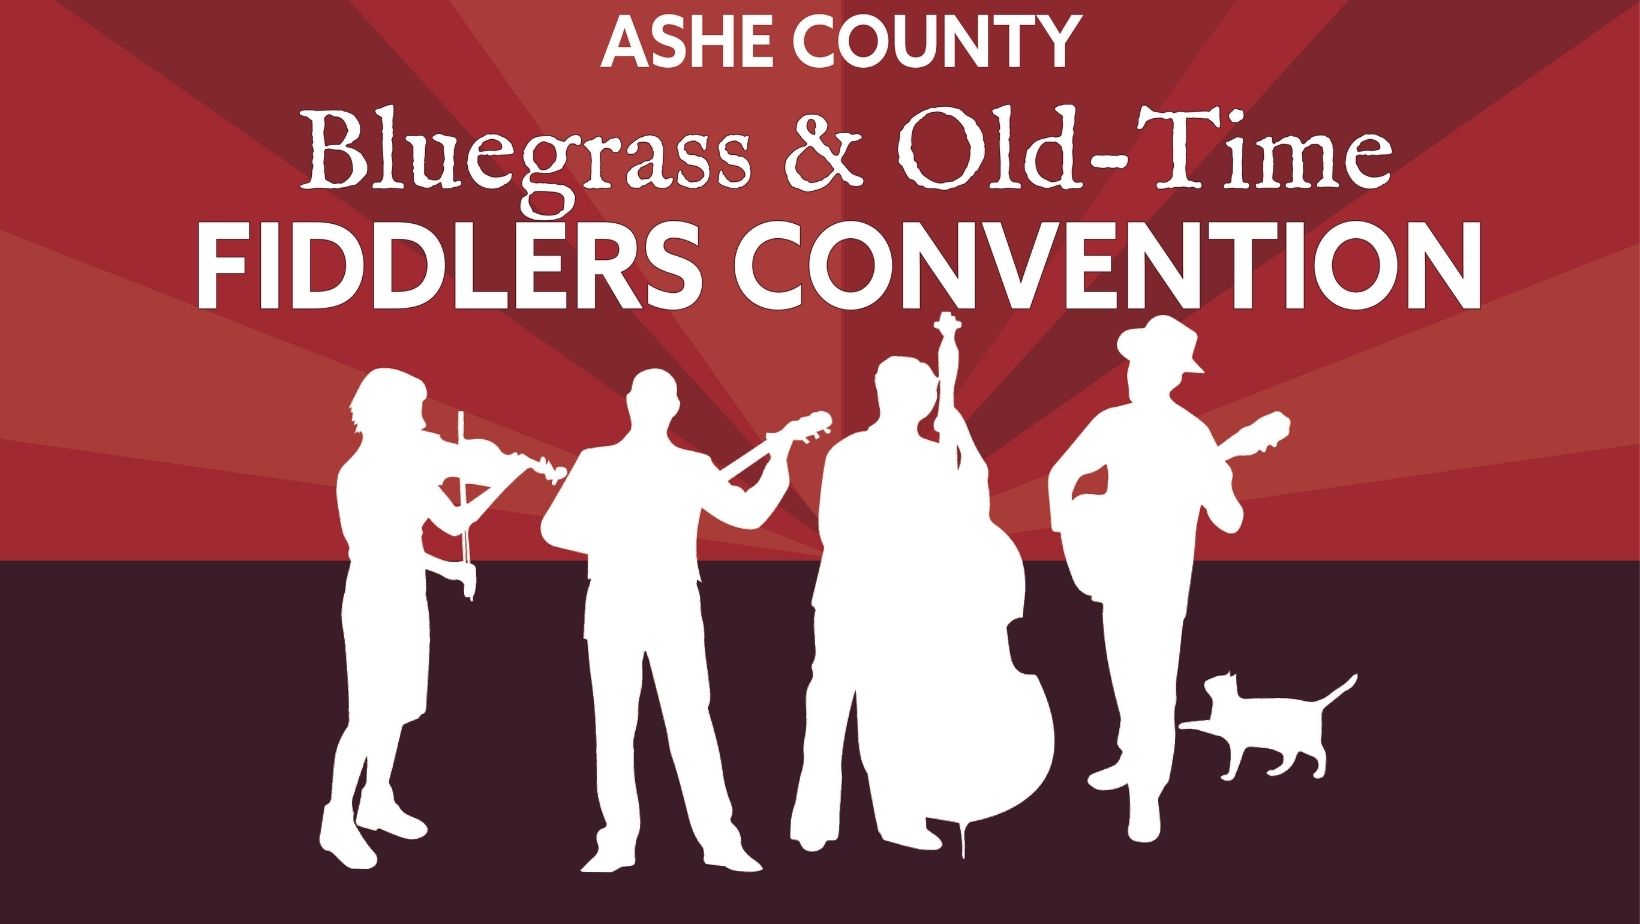 Ashe County Arts Council | Home of Ashe County's Arts Community